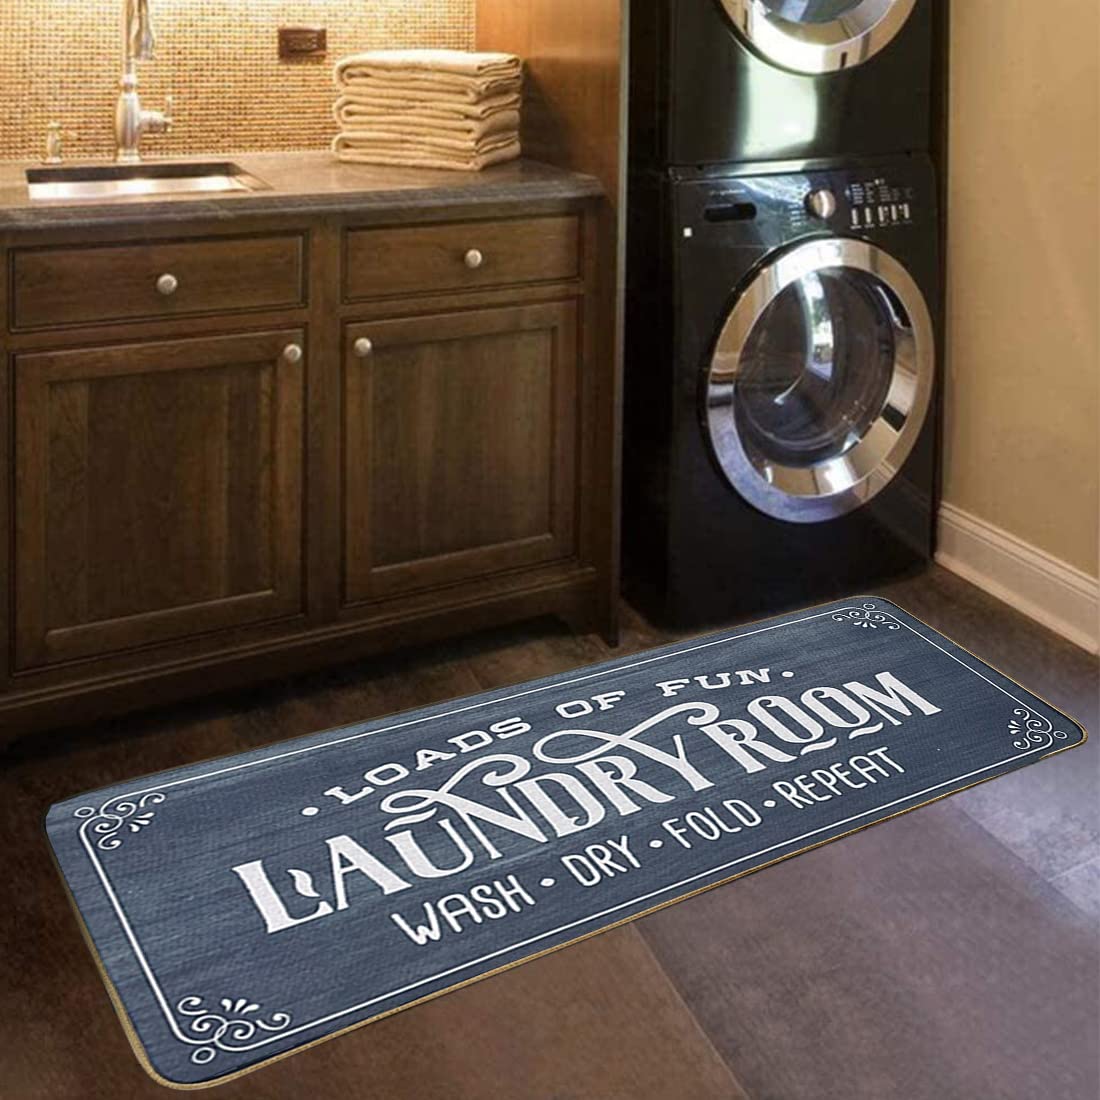 Poowe Farmhouse Laundry Room Rugs Runner and Mats,Non Slip Waterproof Laundry Mats Kitchen Floor Carpet Durable Cushioned Natural Rubber Area Rug for Laundry Room Kitchen Bathroom